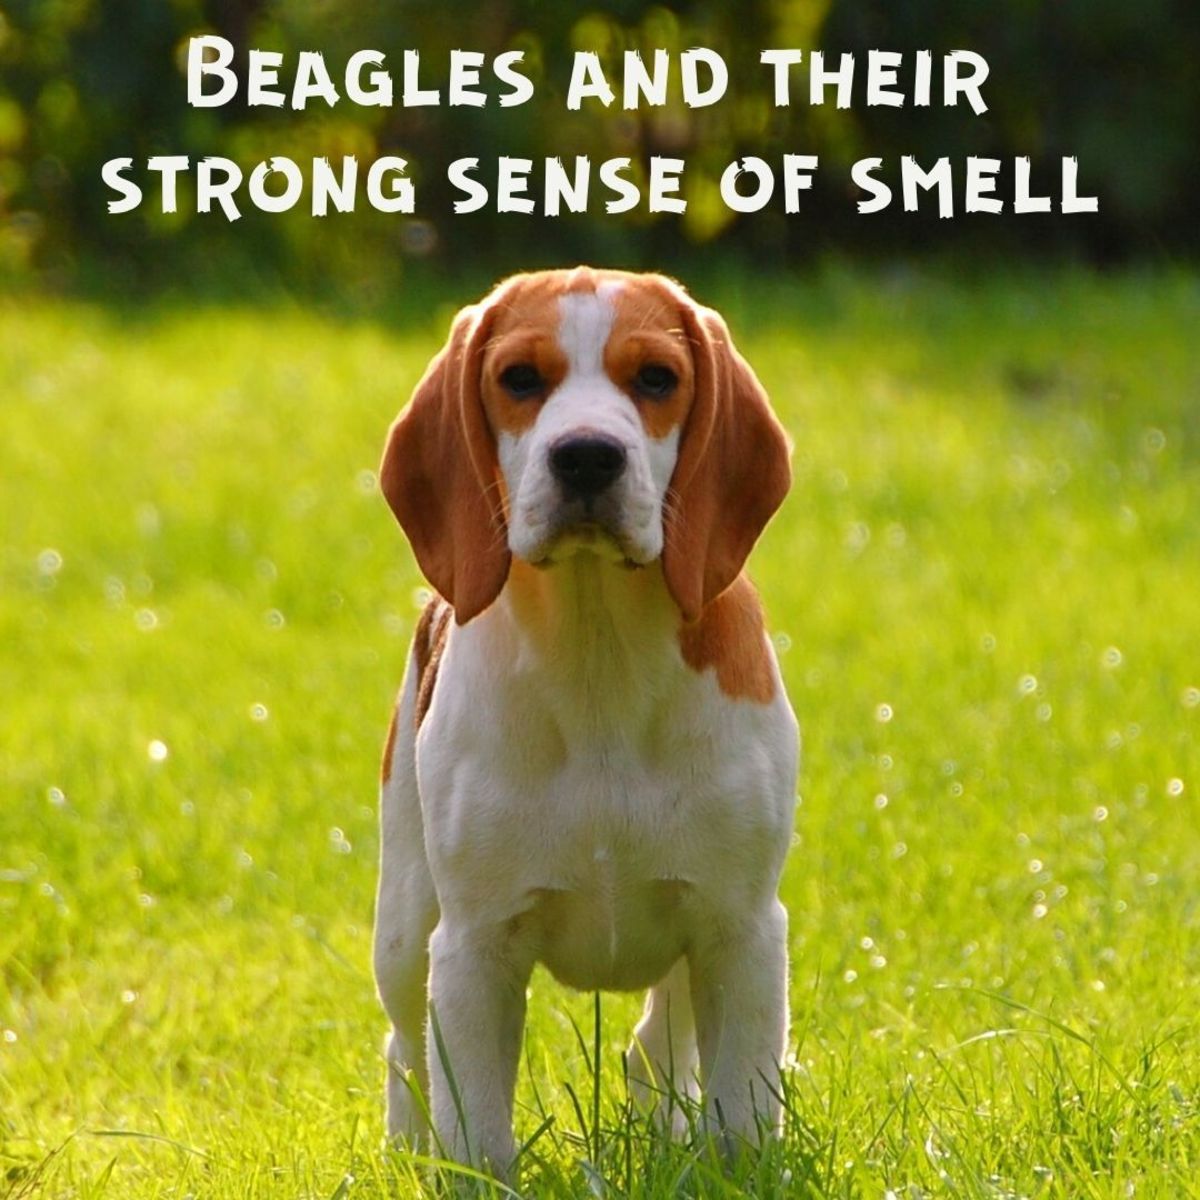 All About Beagles and Their Incredible Sense of Smell